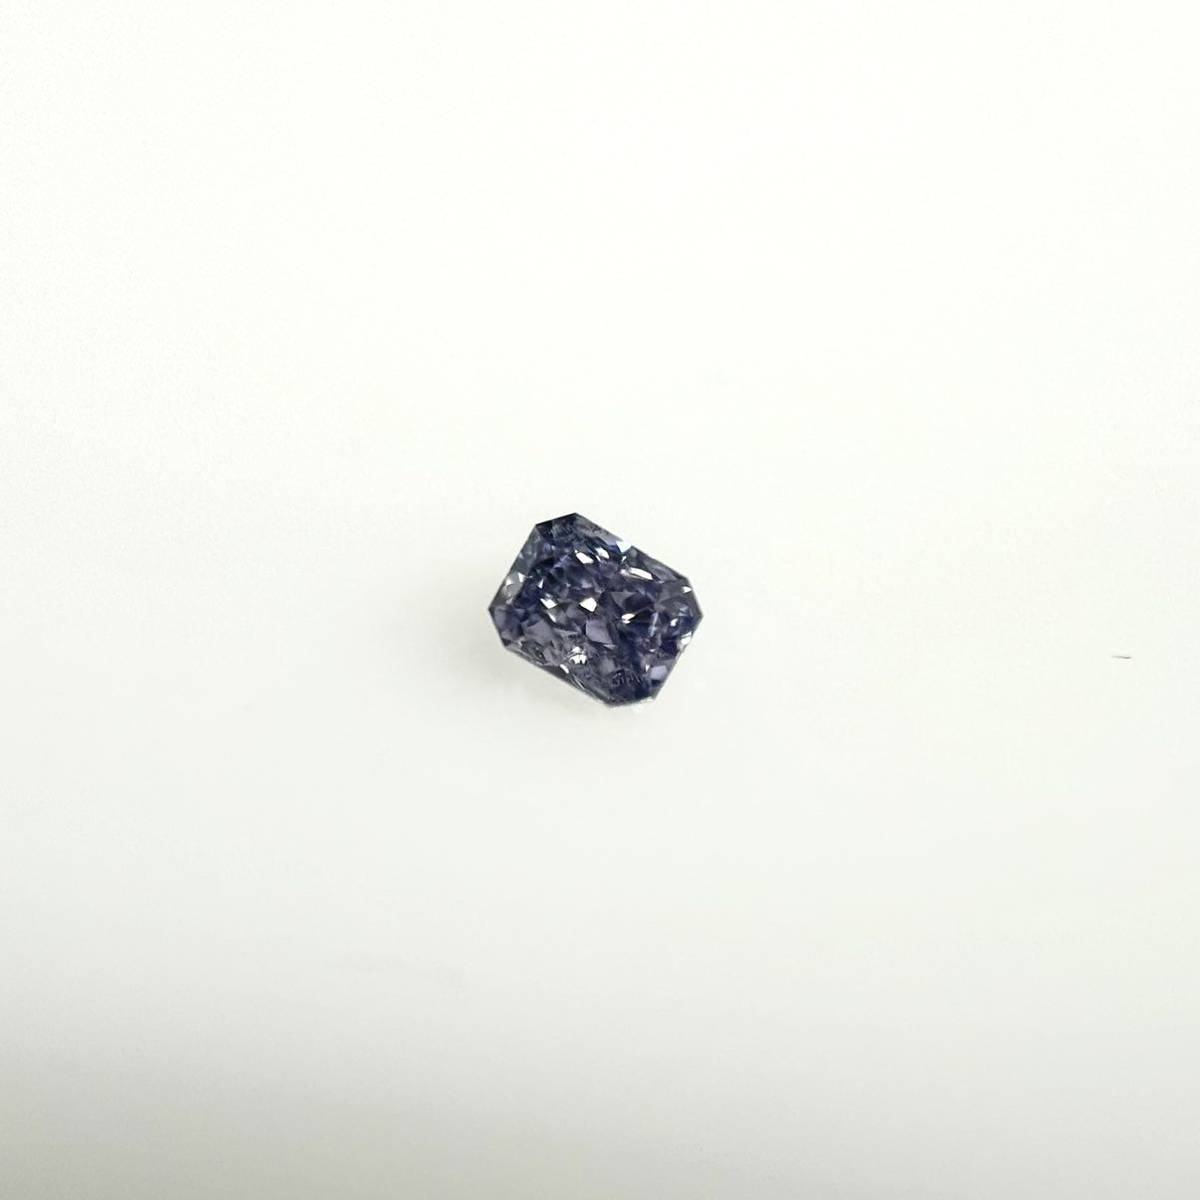 0.029ct FANCY GRAY VIOLET SI1lati Anne to violet diamond loose 